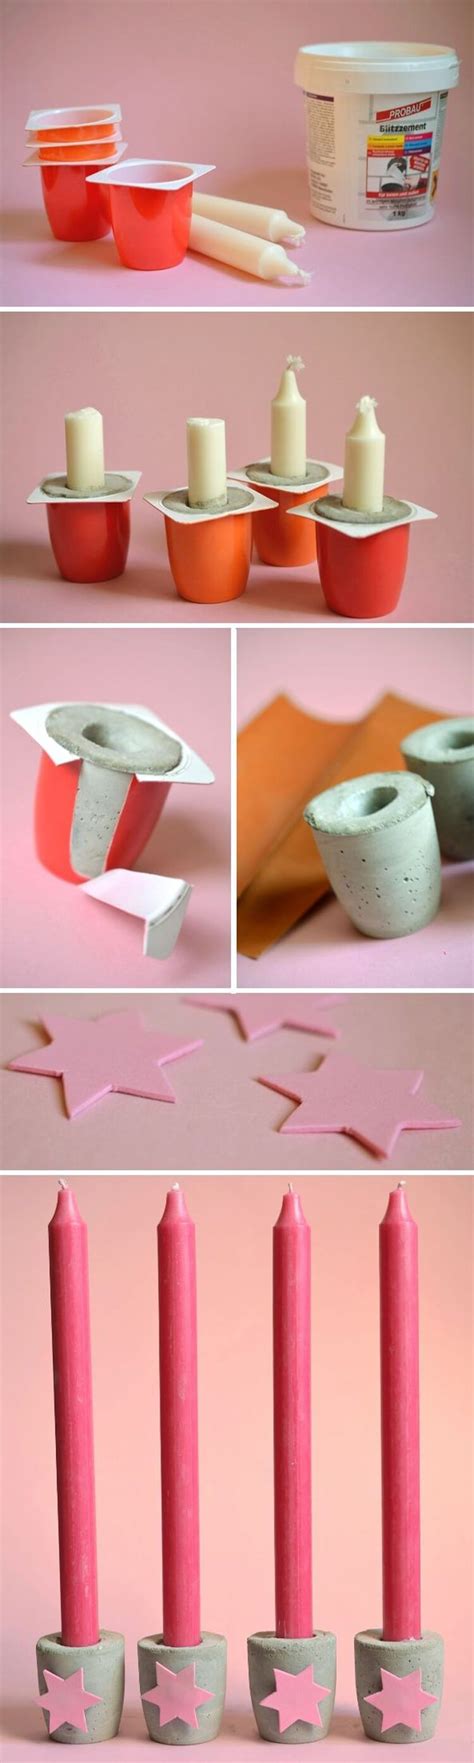 35 Fun and Easy DIY Home Decor Projects You Can Do This Weekend